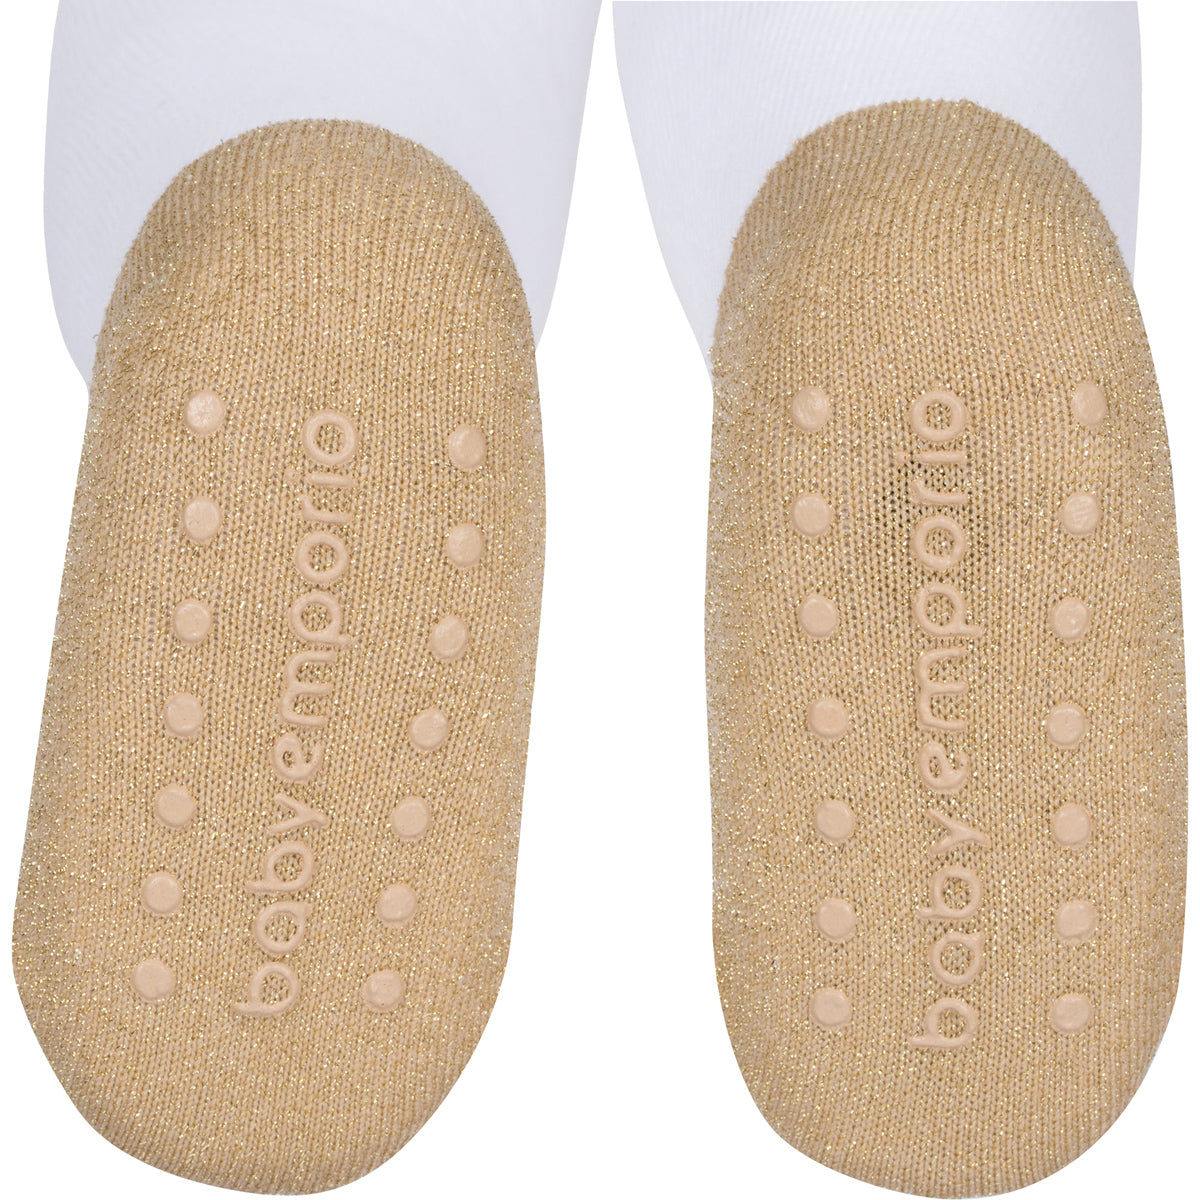 Baby Emporio infant girl baby socks with nearly invisible anti-slip soles matching the socks gold sole color